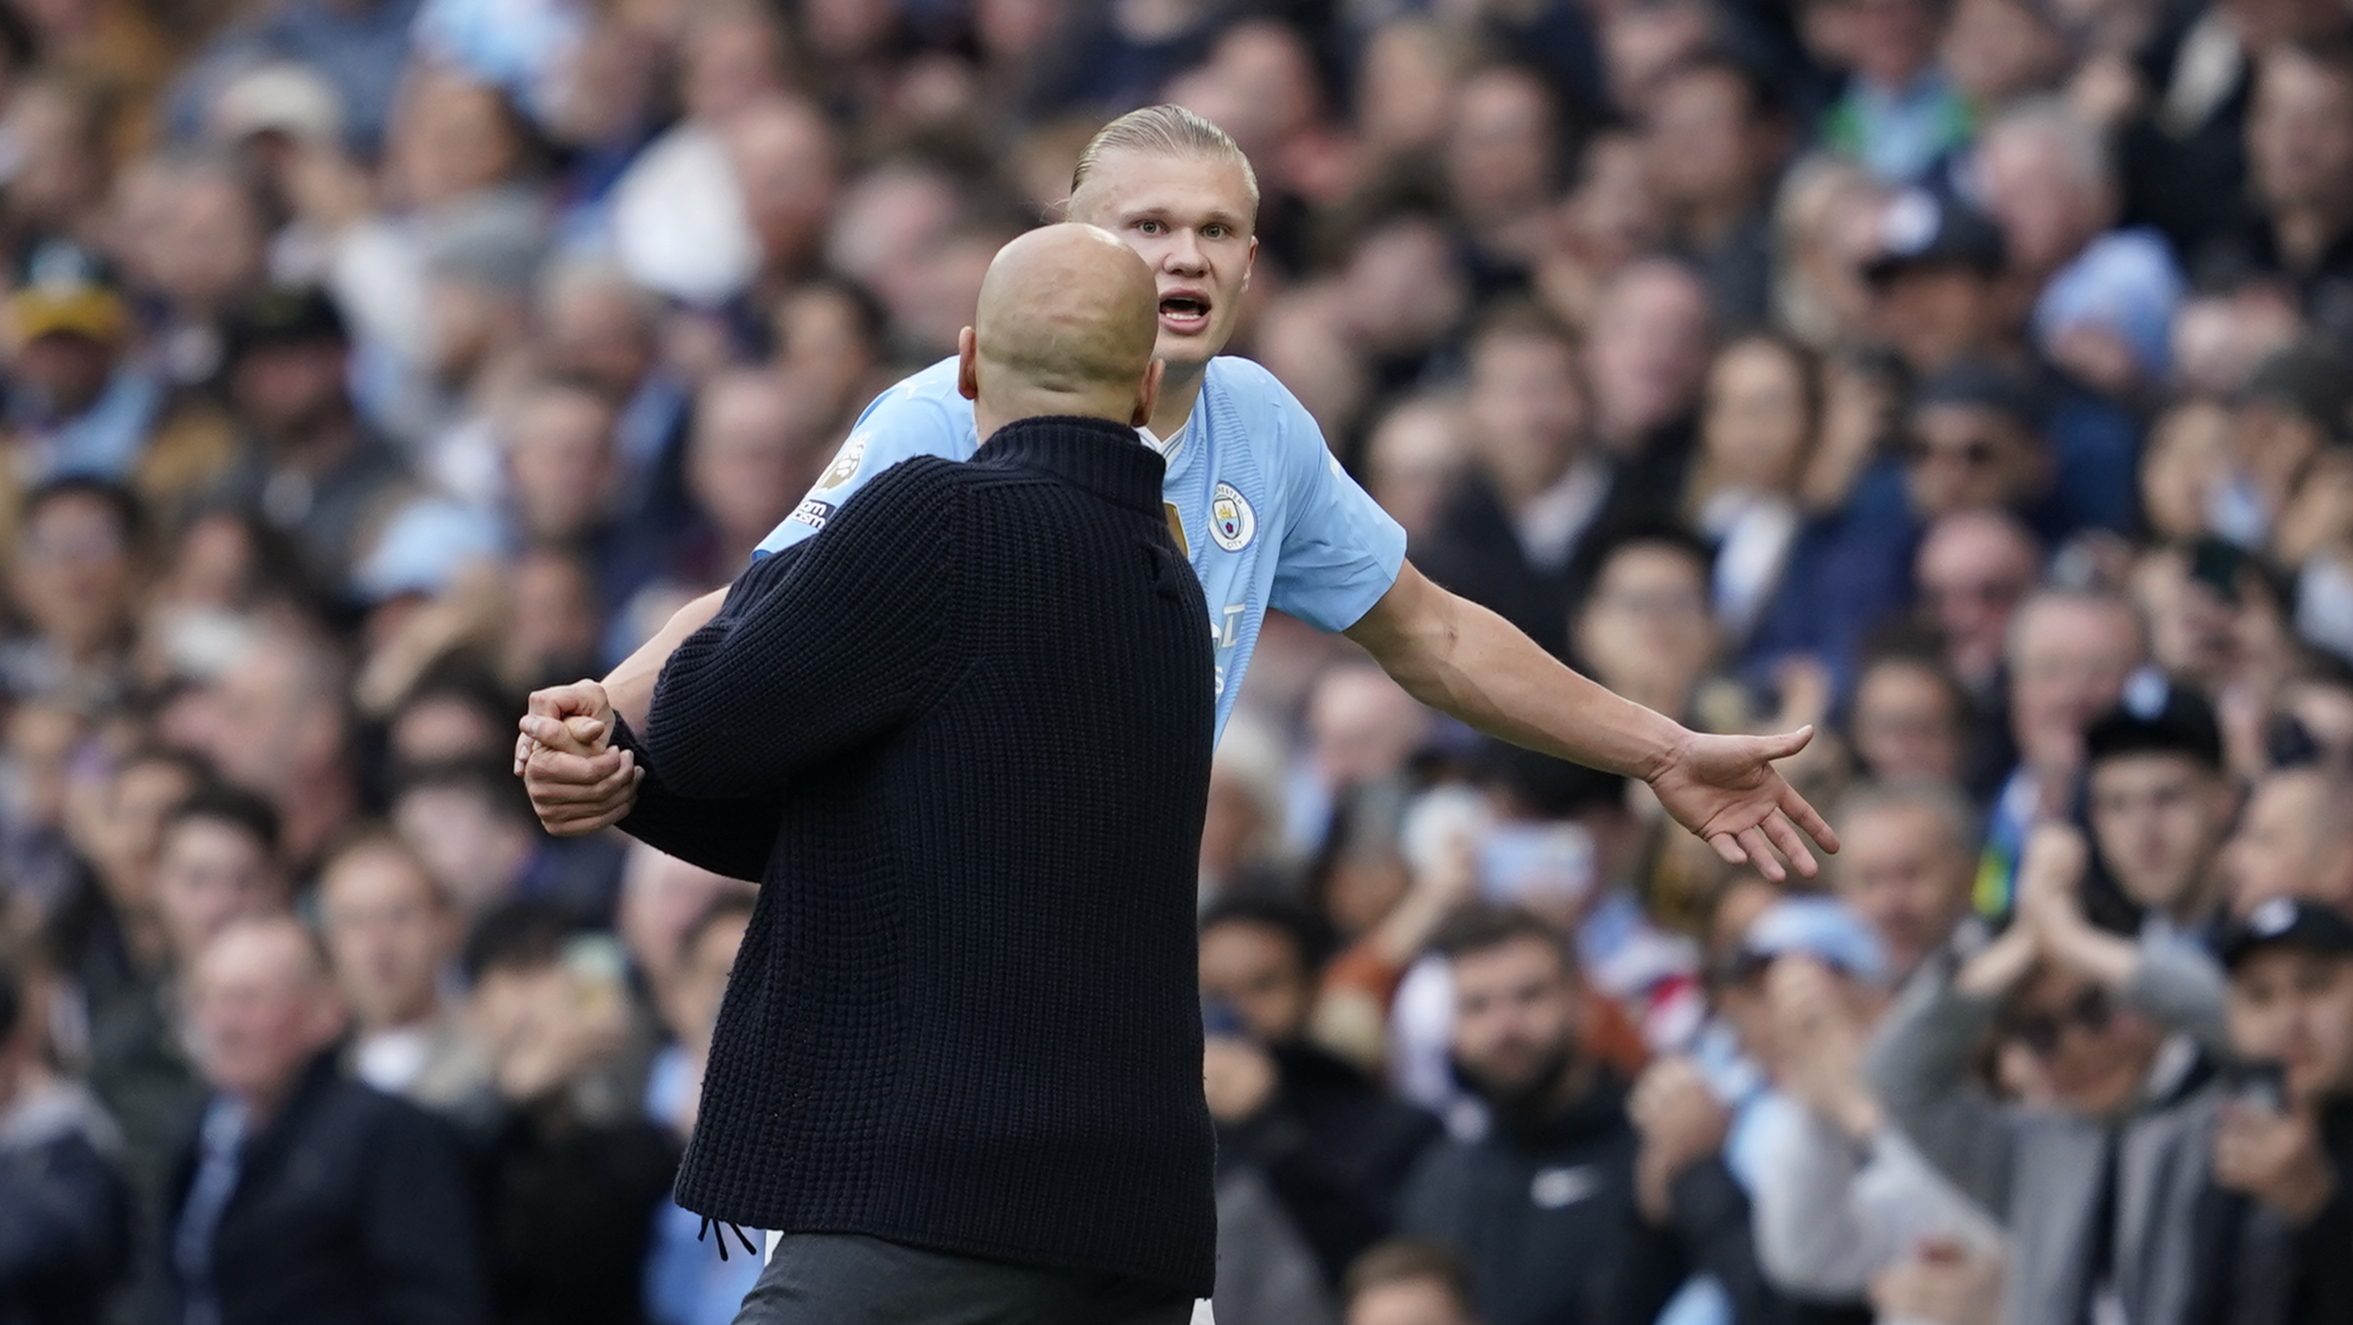 haaland's-ugly-gesture-with-guardiola-when-he-was-substituted-after-scoring-four-goals-with-city-[video]